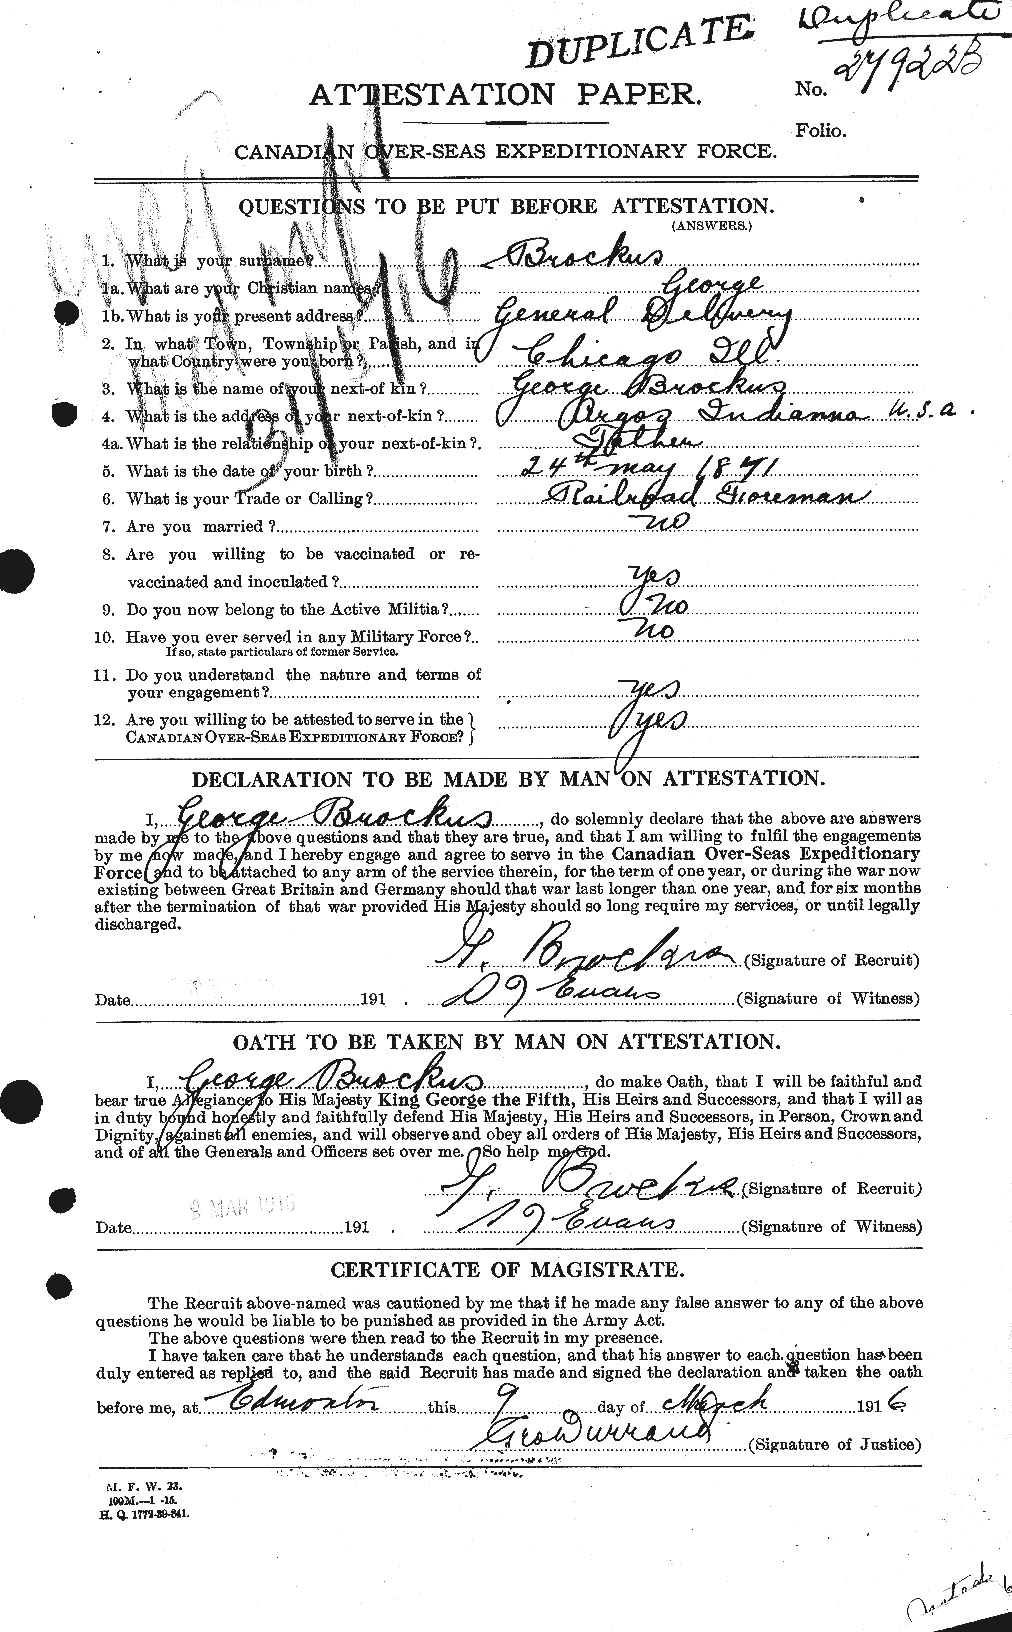 Personnel Records of the First World War - CEF 260946a